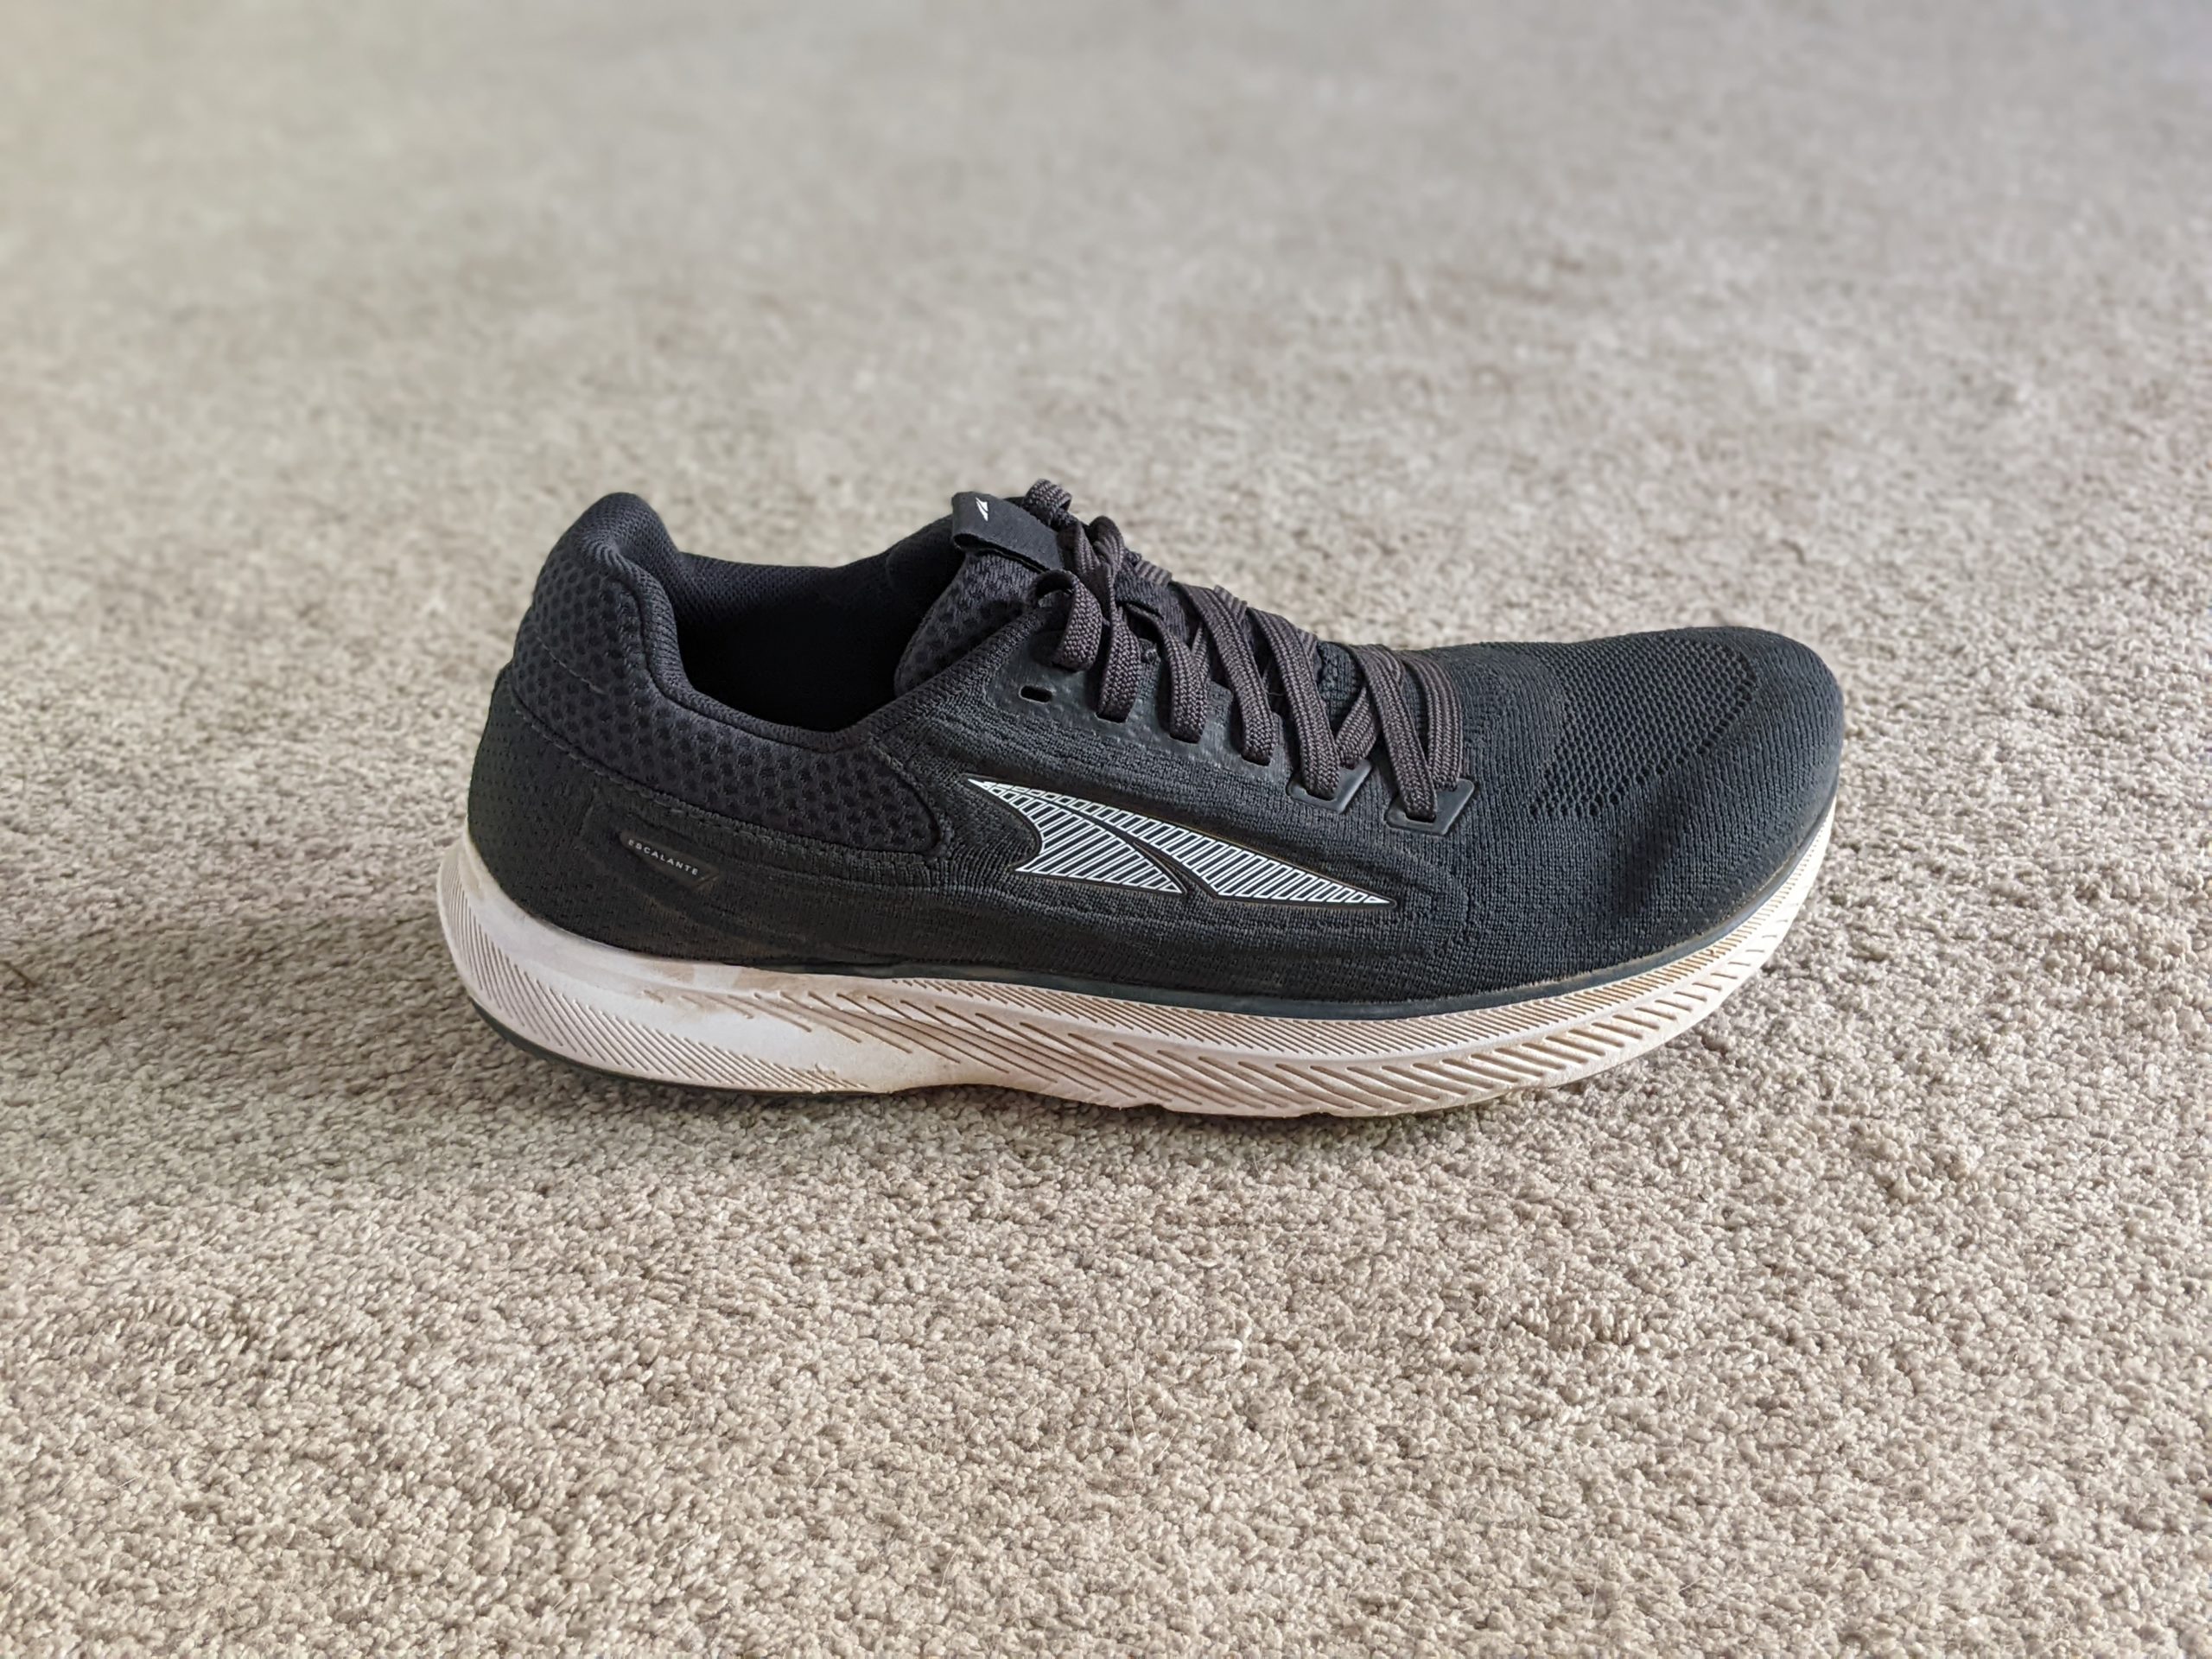 Altra Escalante 3 Review - What's changed since 2.0 and 2.5